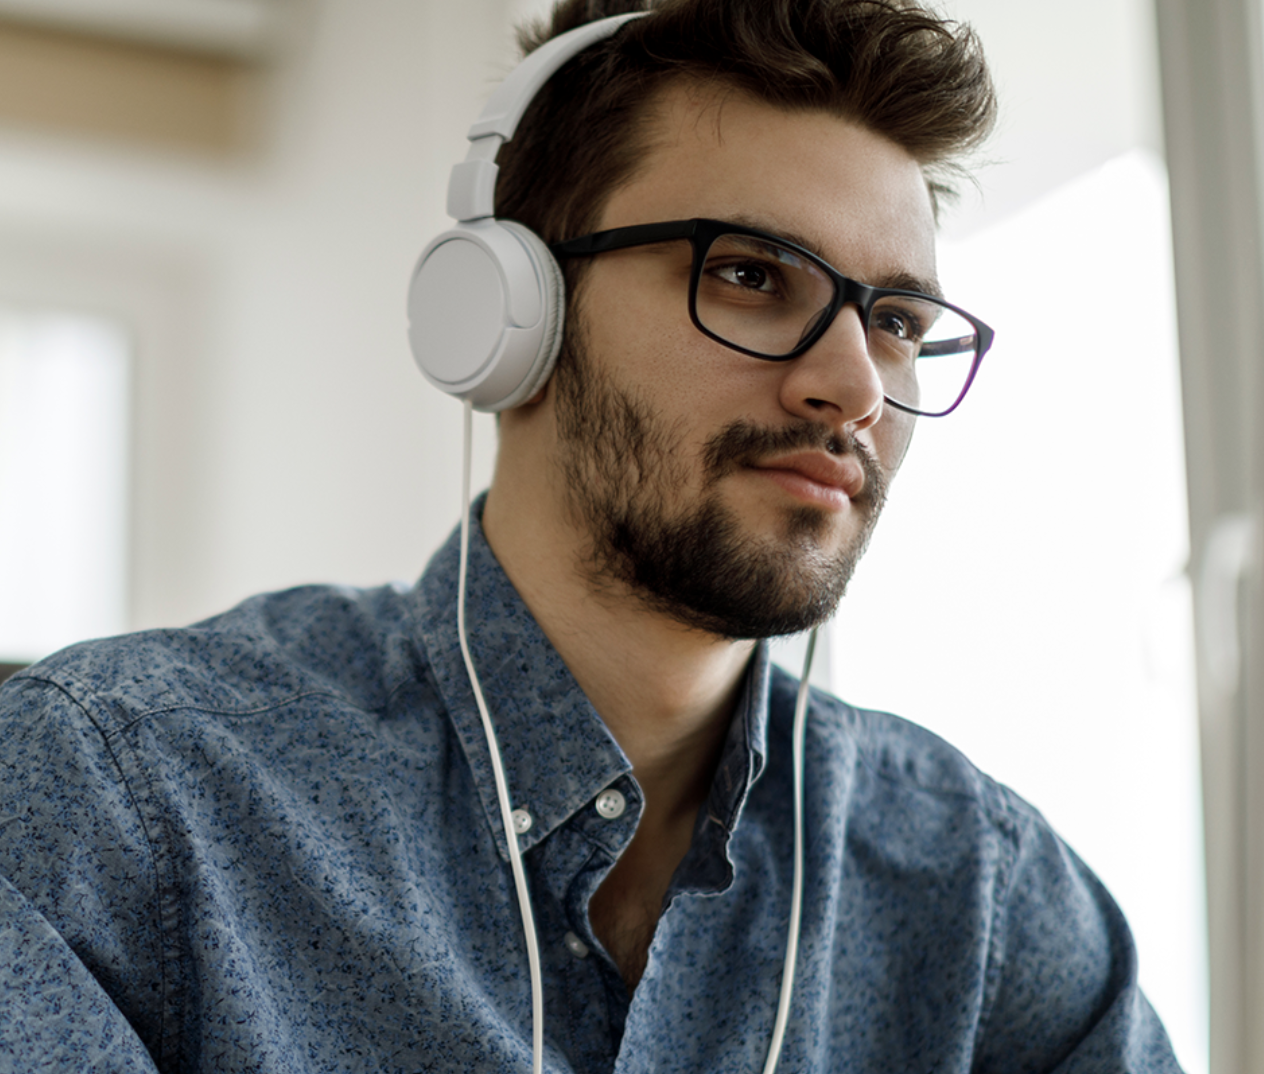 photo of man listening to headphones while working at computer